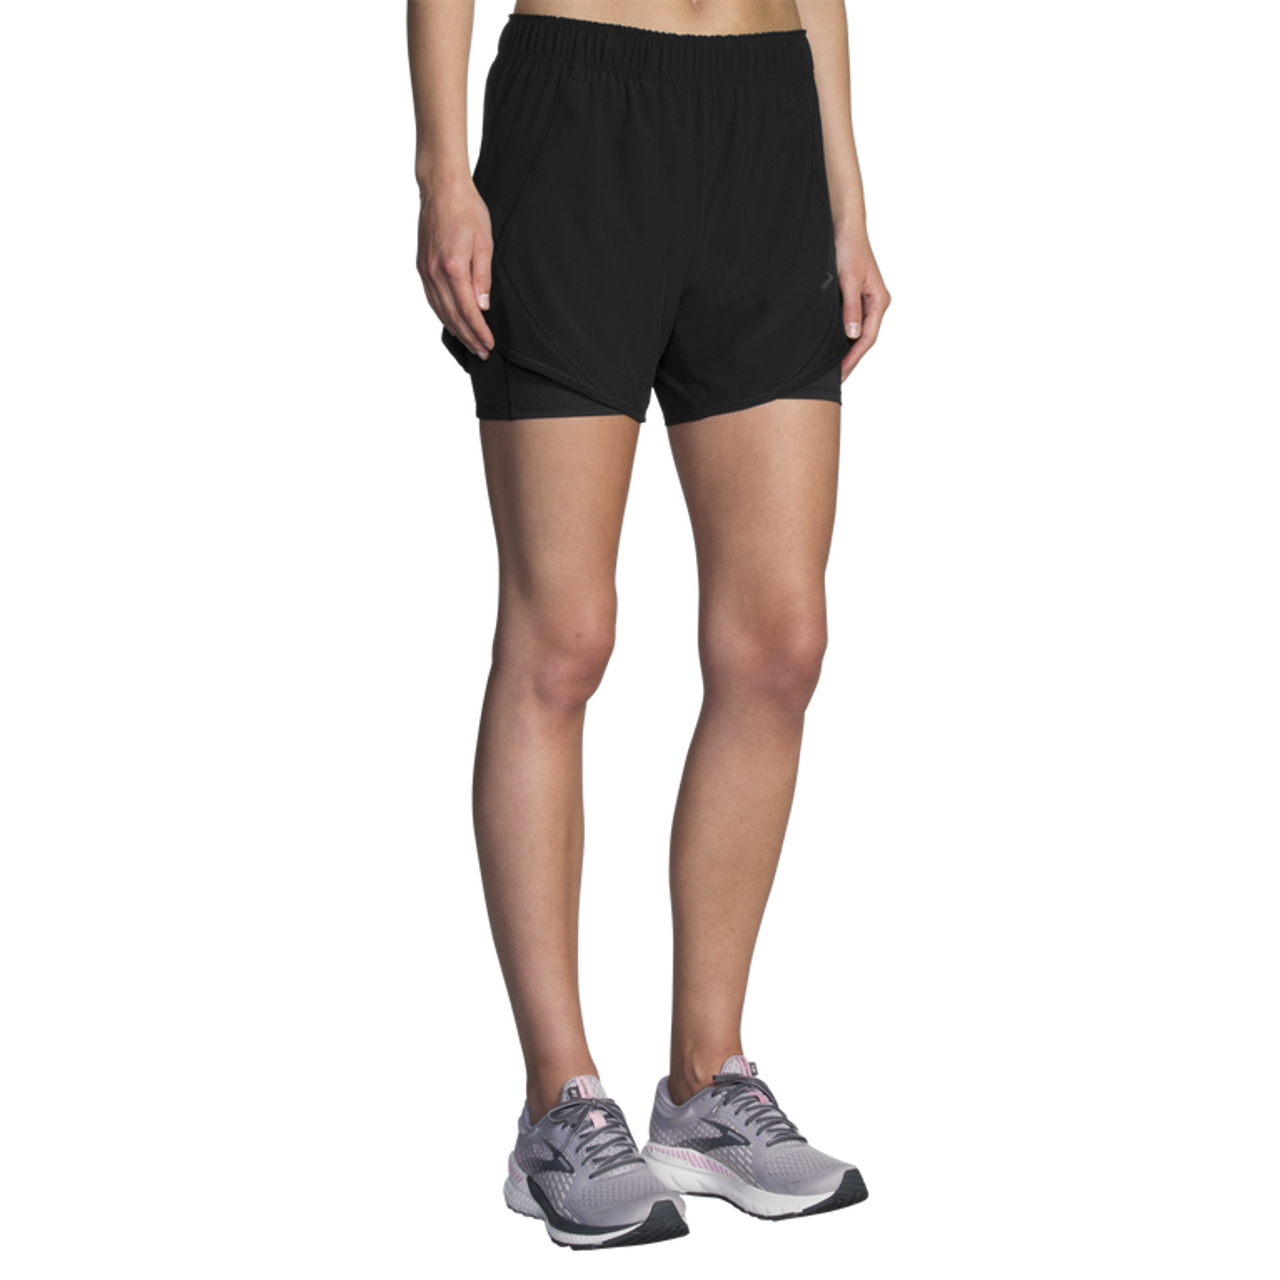 Chaser Women's 5 Running Shorts with Liner